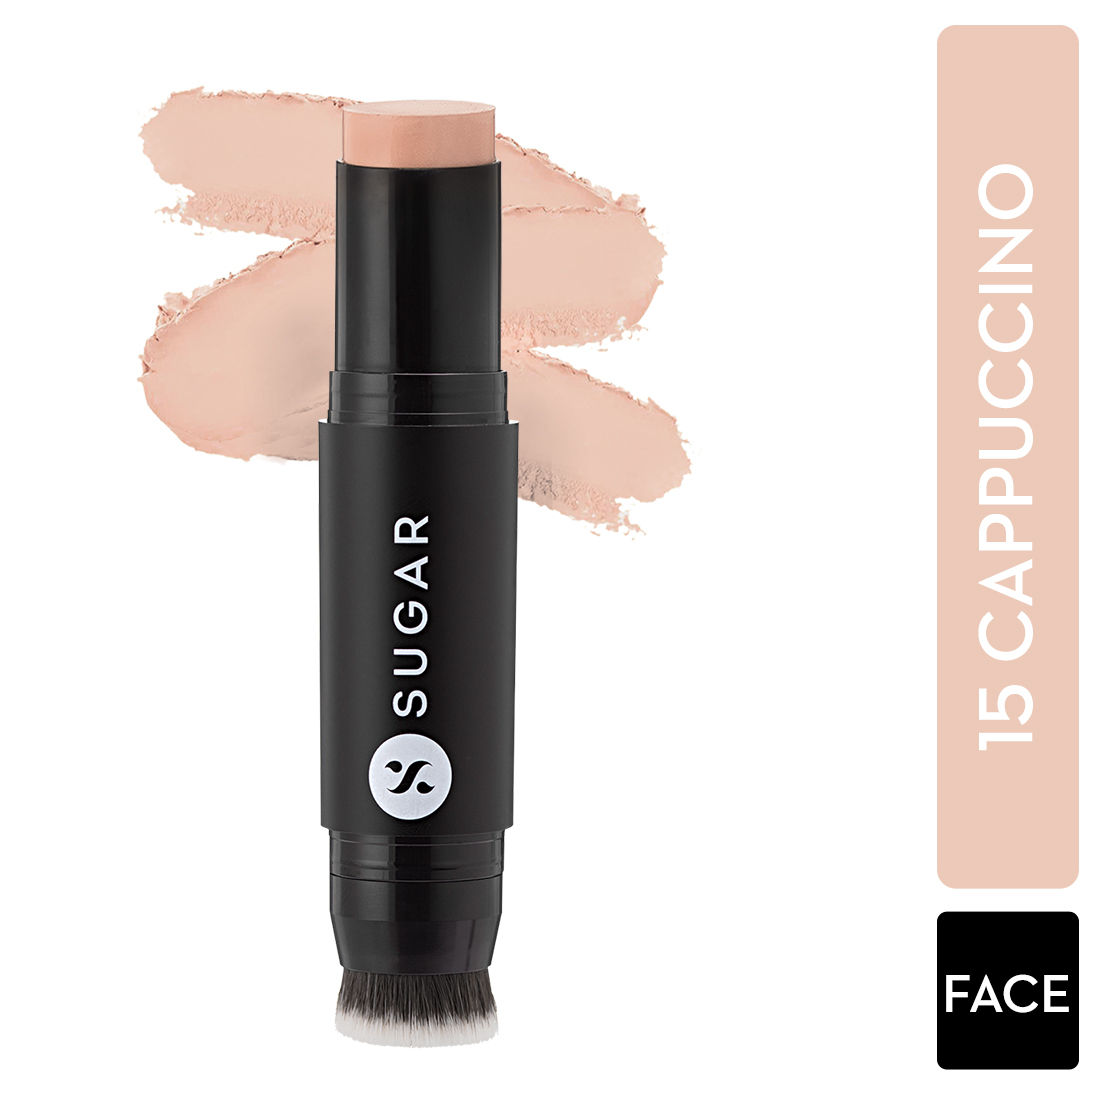 Buy SUGAR Cosmetics - Ace Of Face - Foundation Stick - 15 Cappuccino (Light Foundation with Cool Undertone) - Waterproof, Full Coverage Foundation for Women with Inbuilt Brush - Purplle